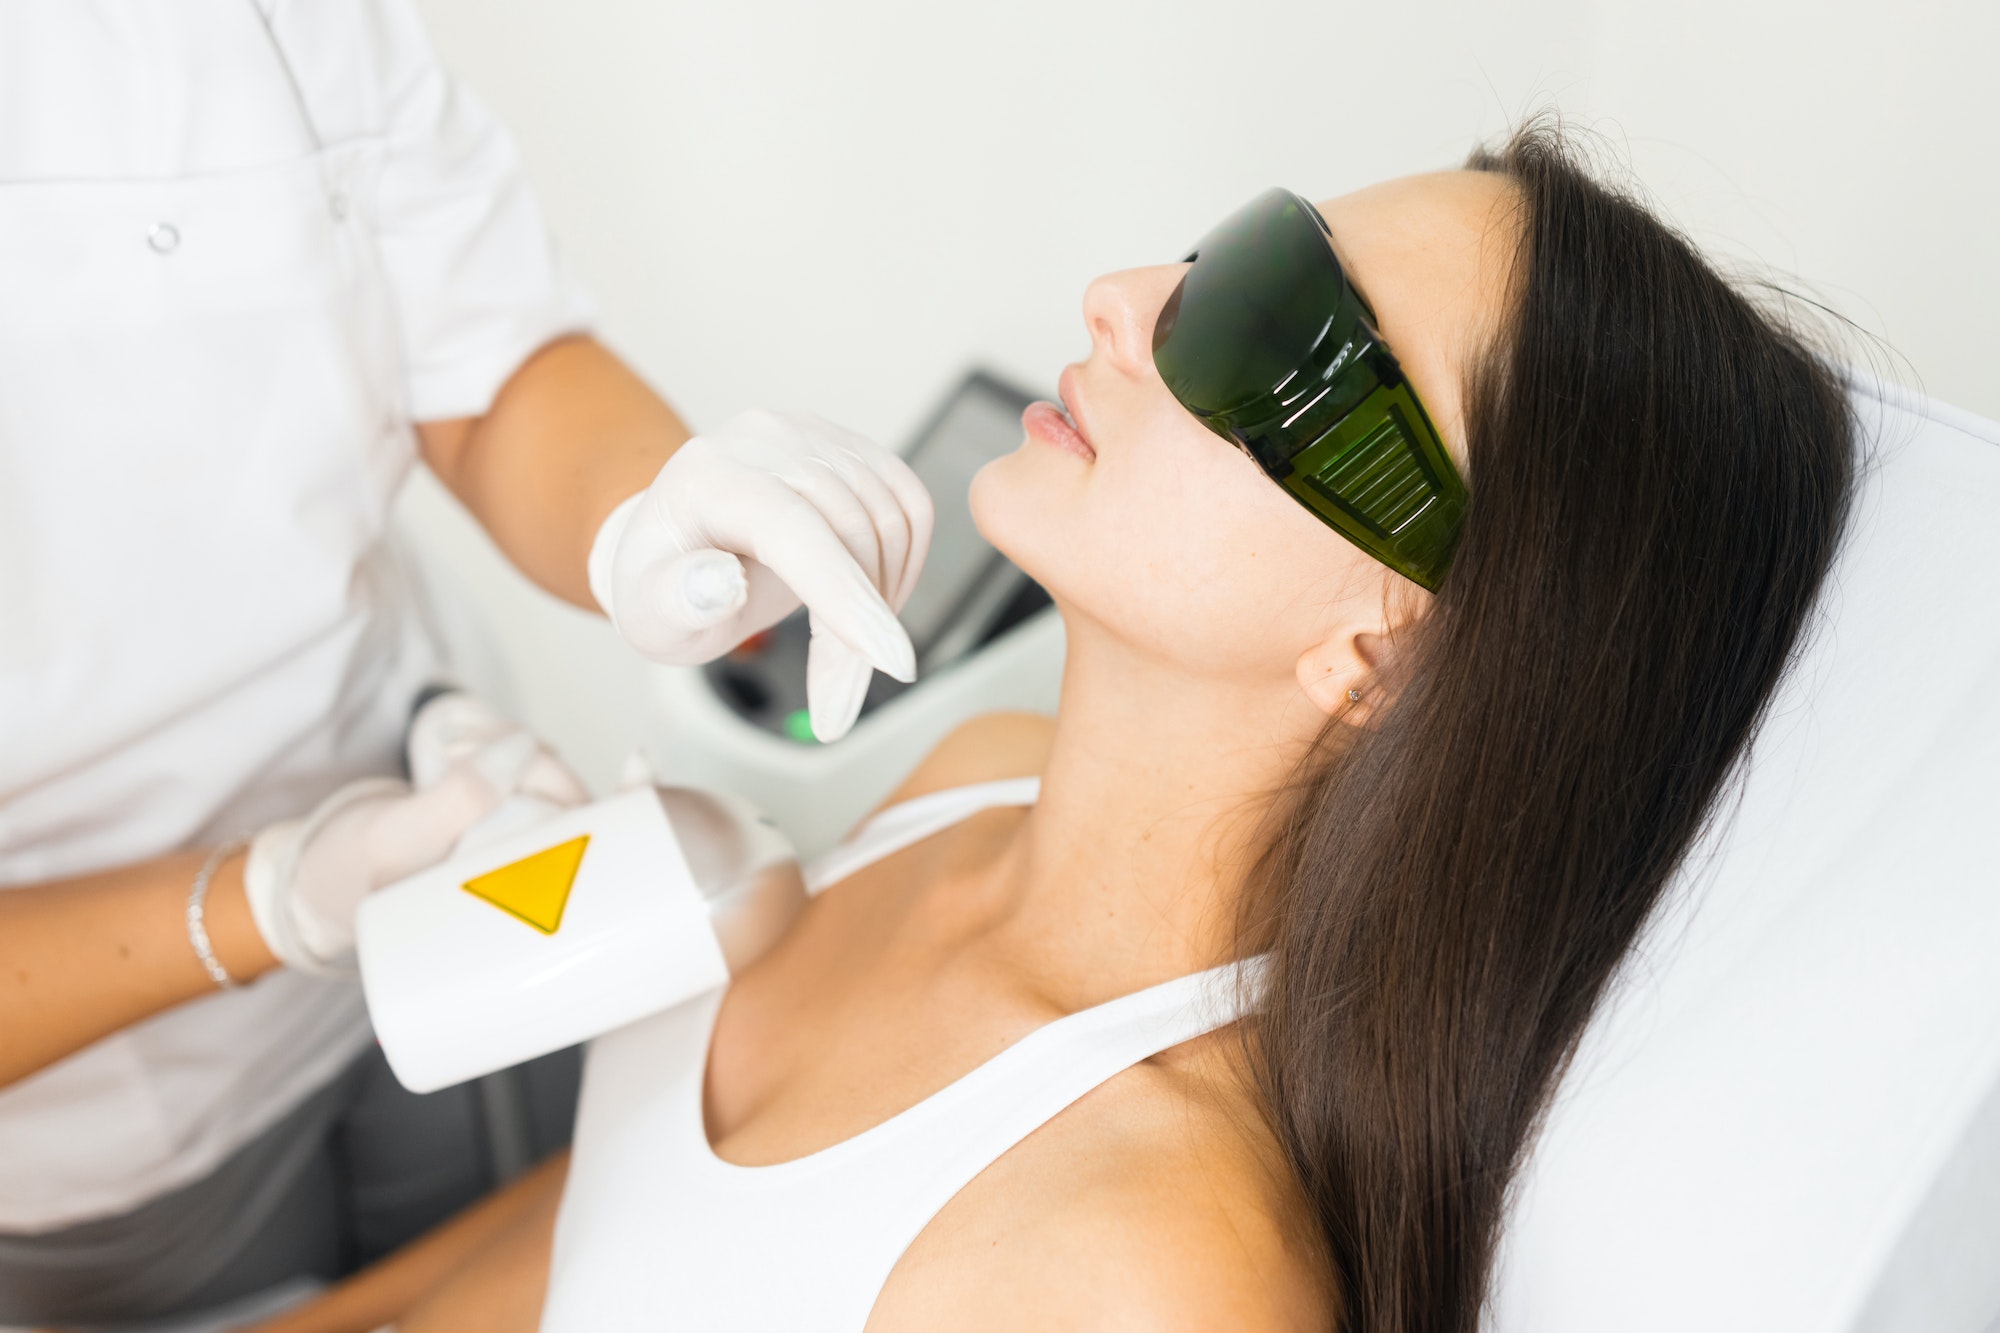 What is Laser Hair Removal Treatment and How Does It Work?